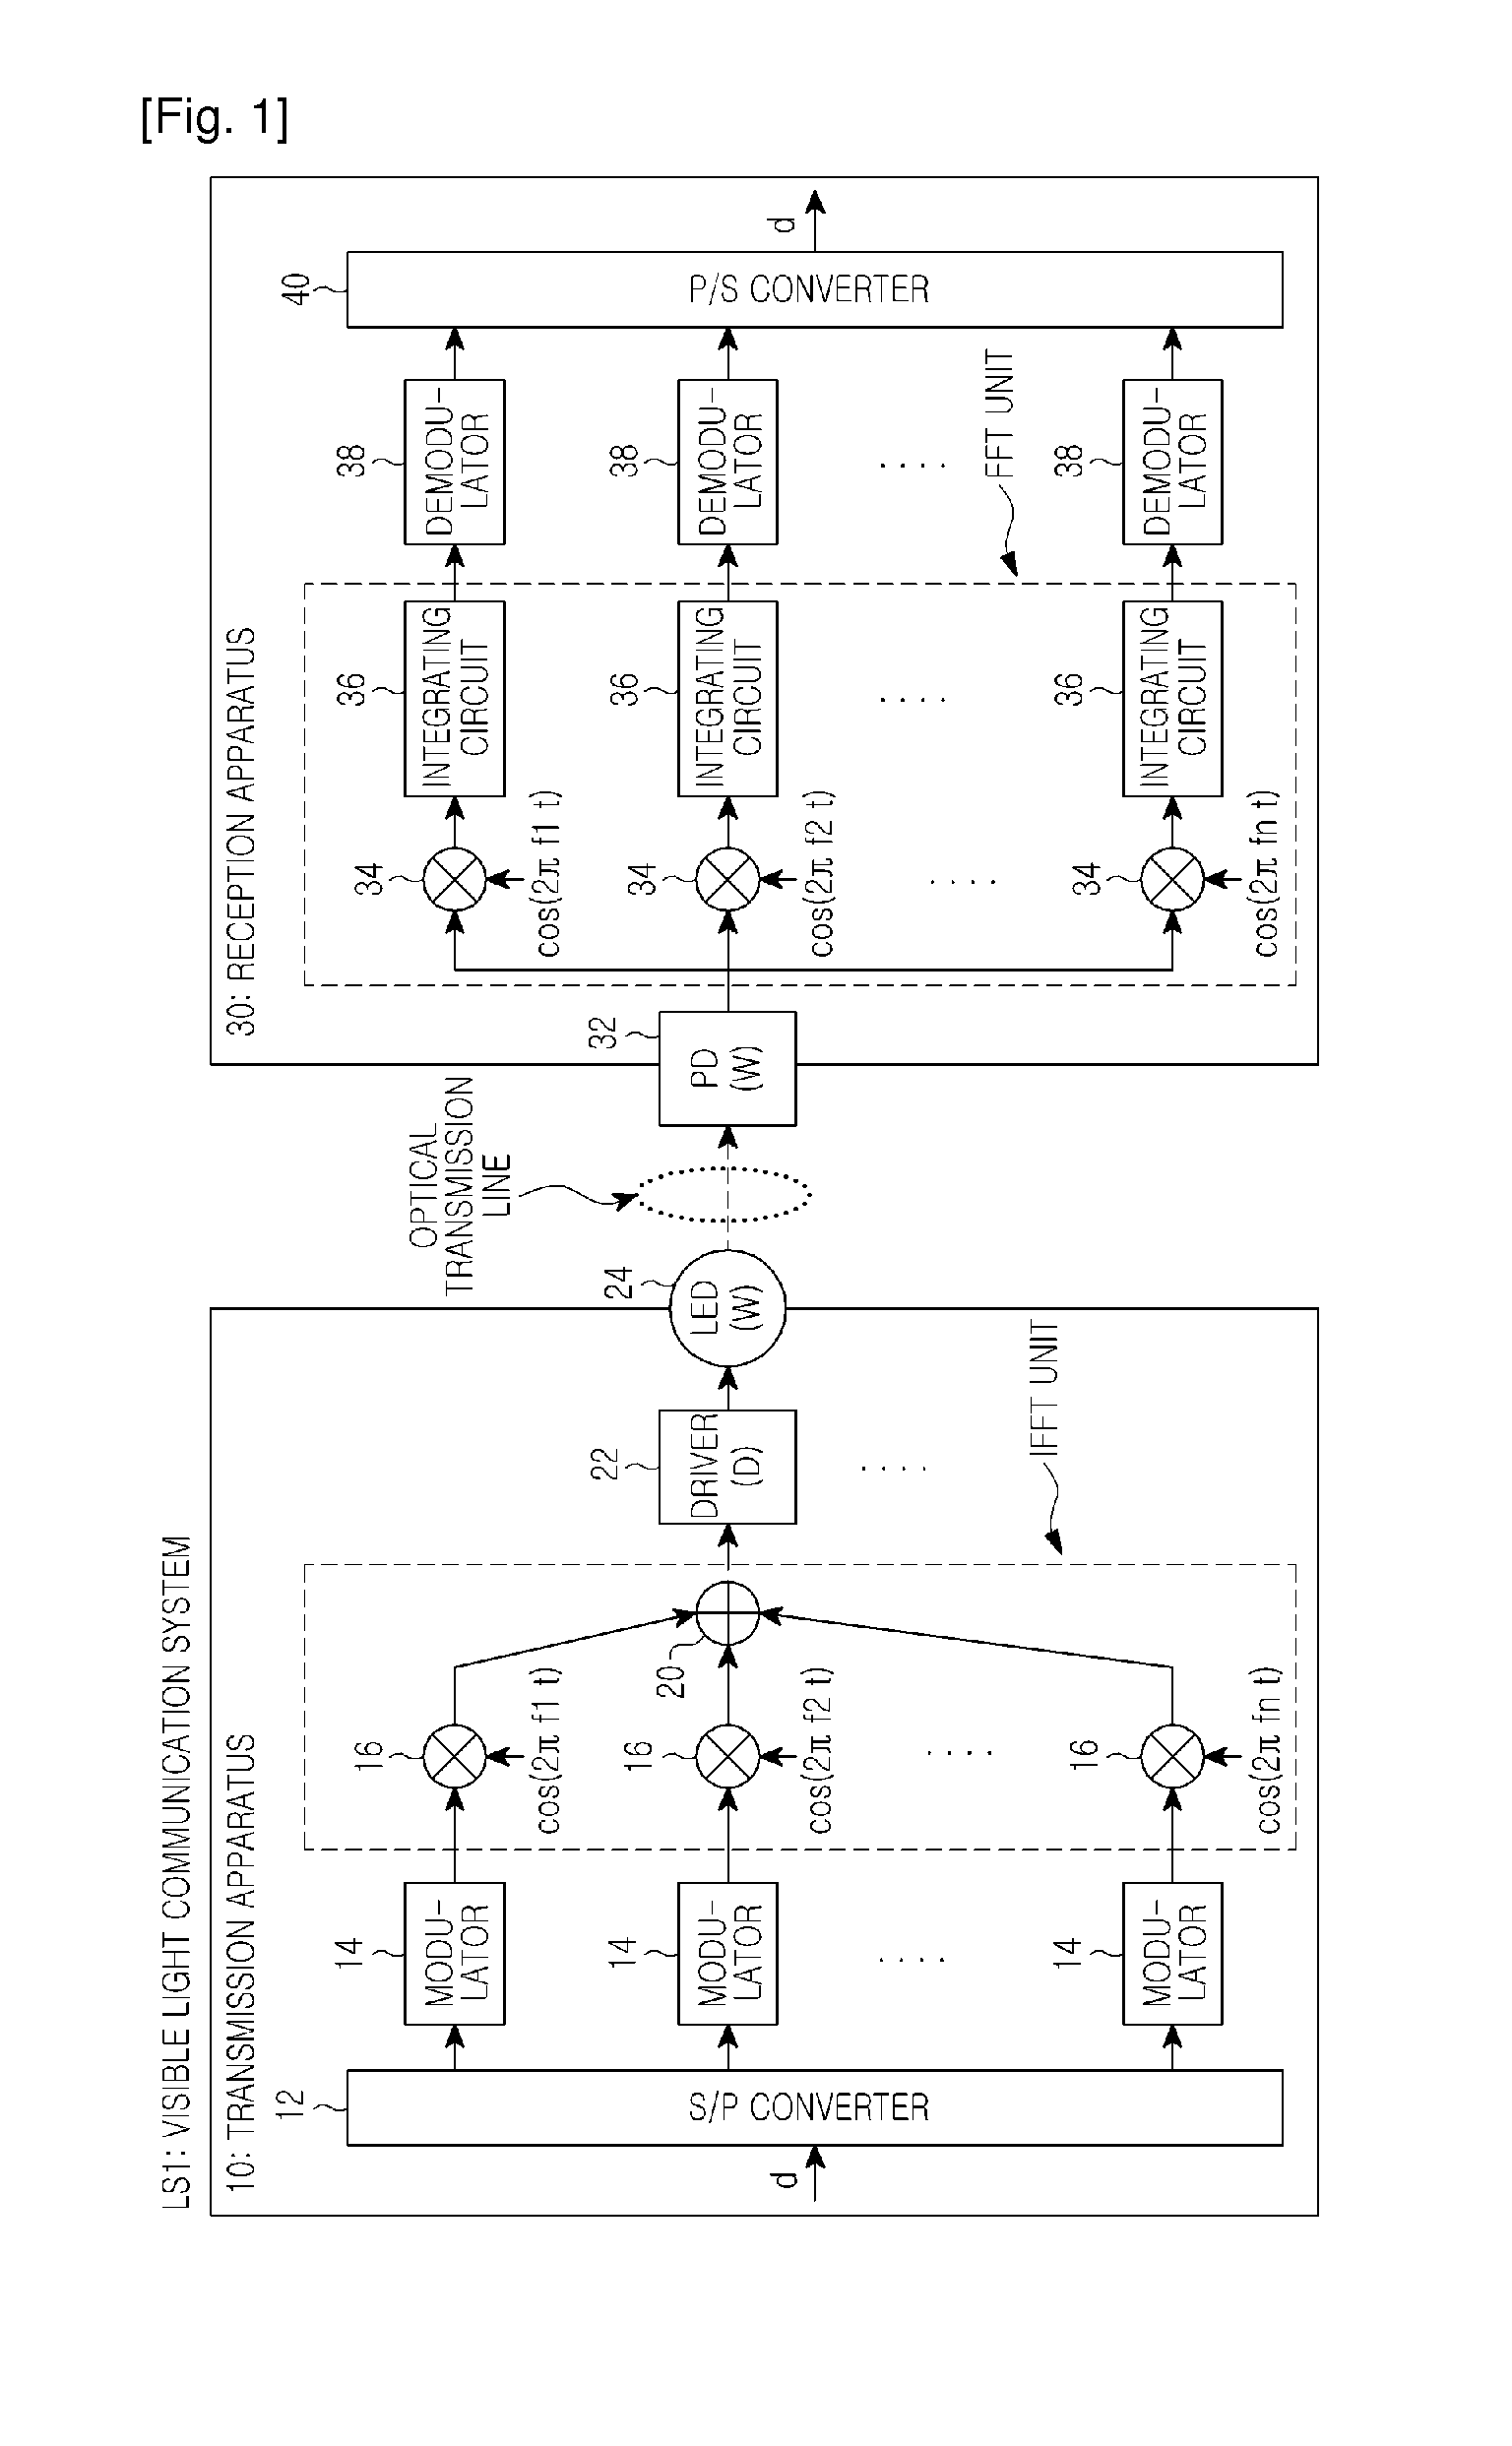 Visible ray communication system, transmission apparatus, and signal transmission method